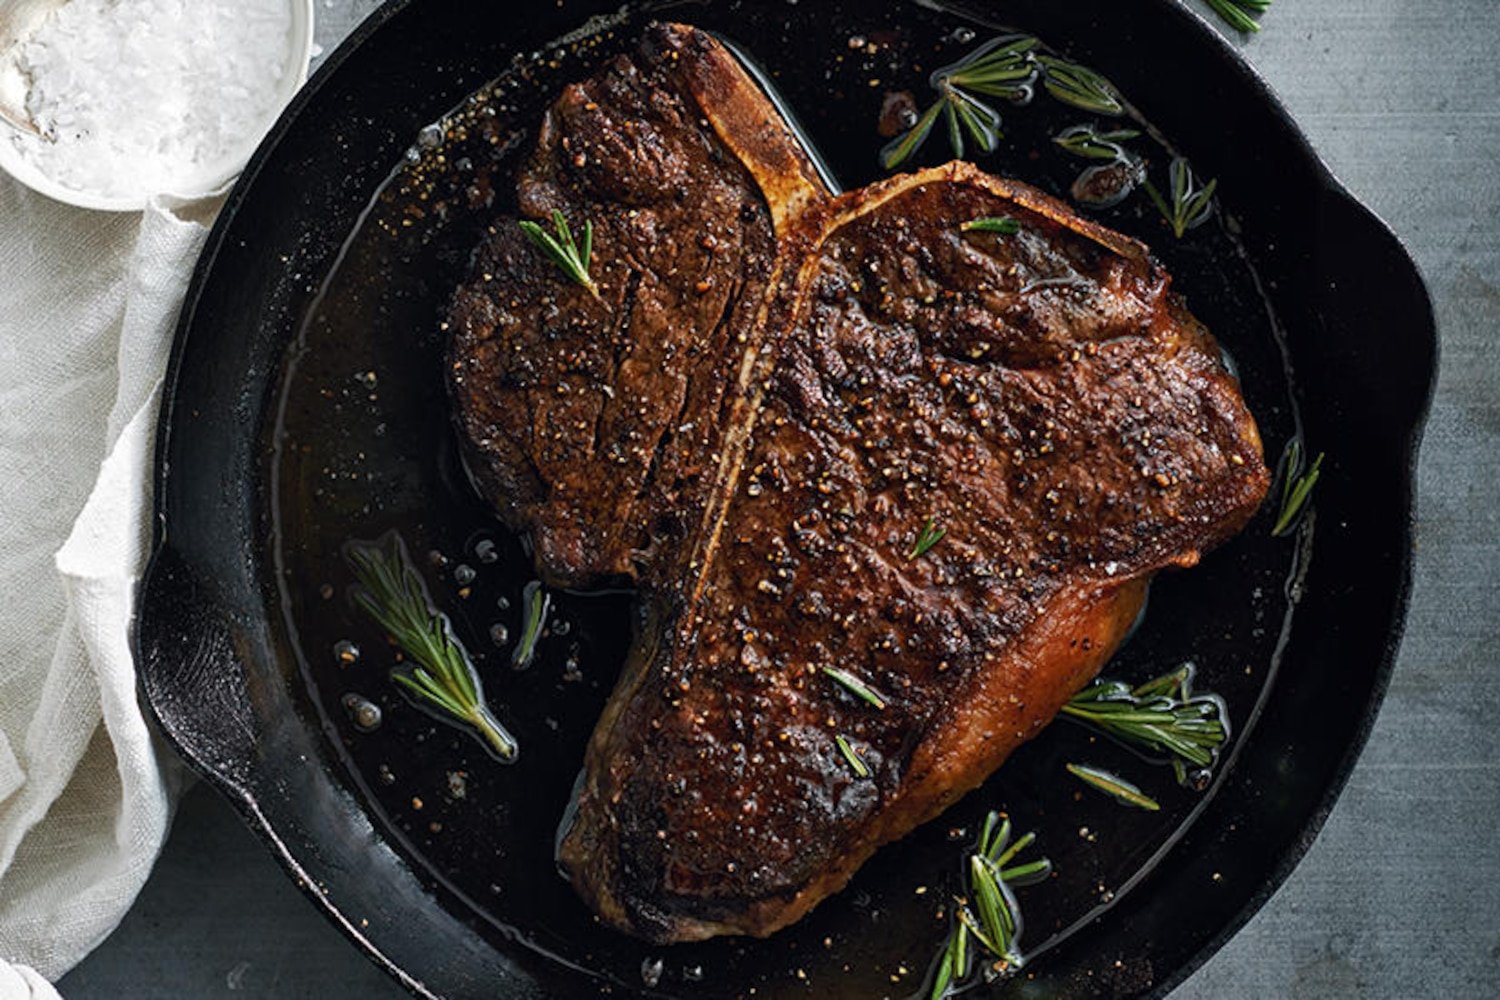 Steak guide: How to choose the best grilling steak ...